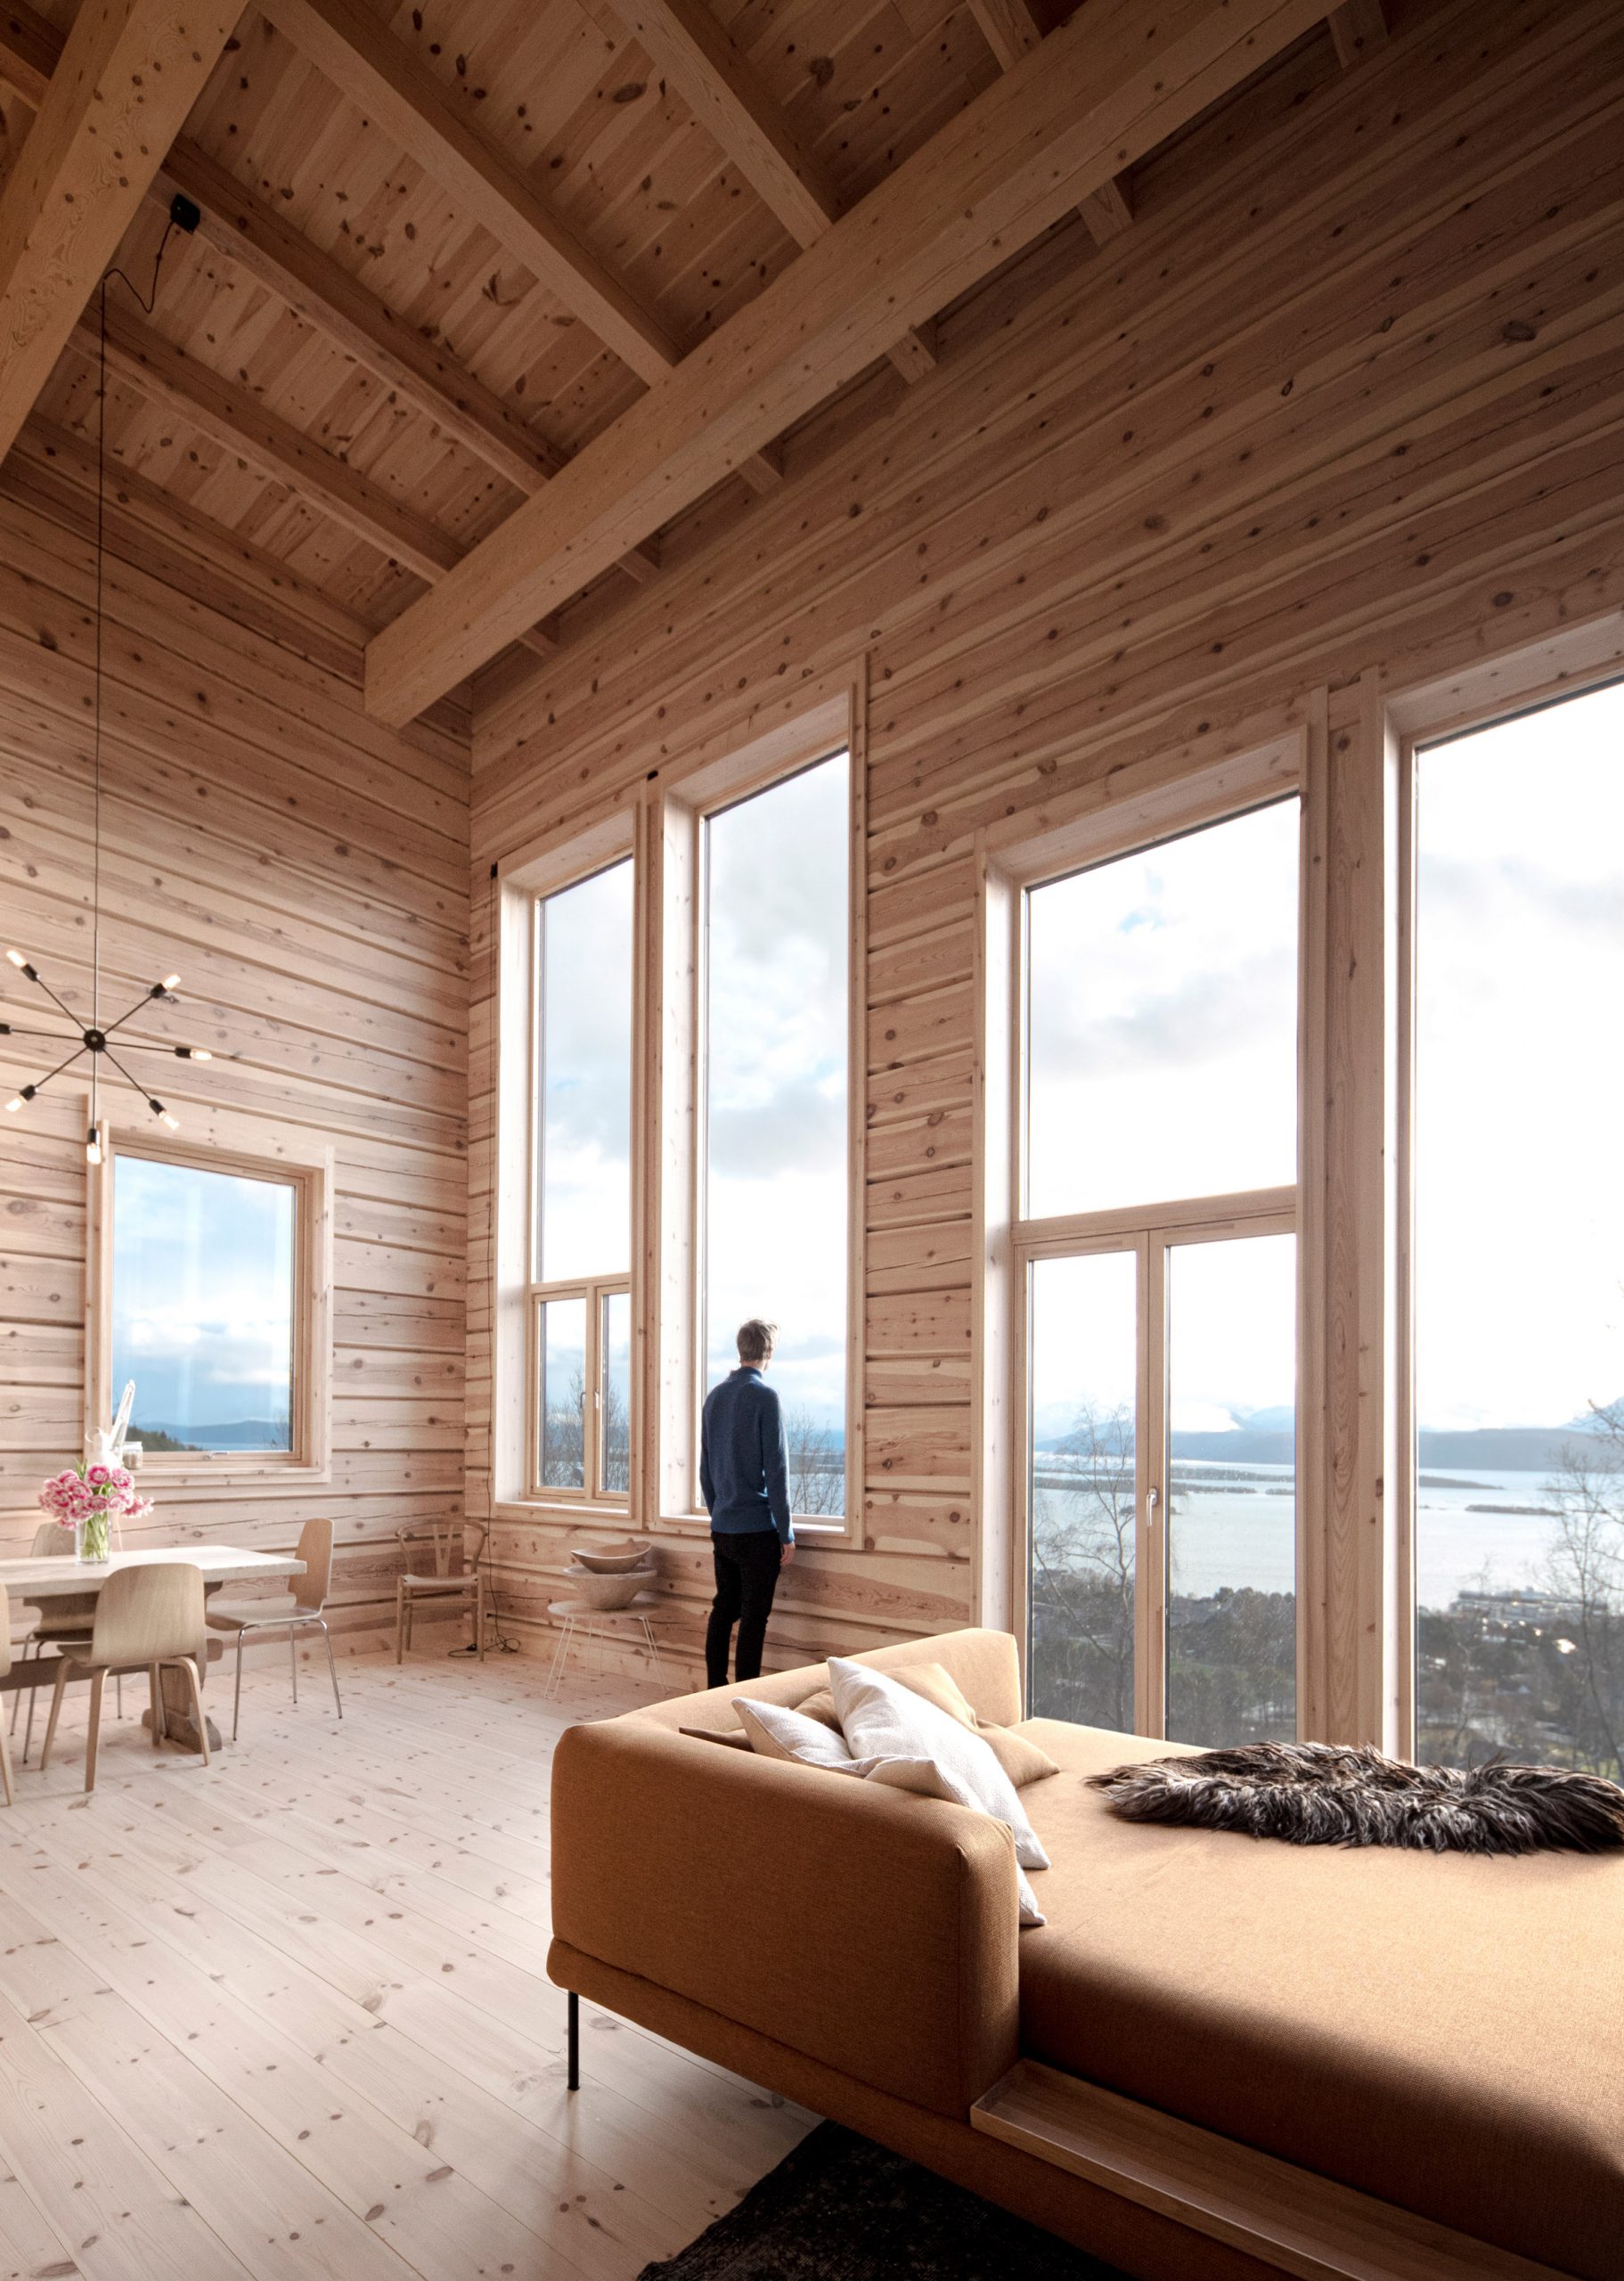 Living room with views of the fjord